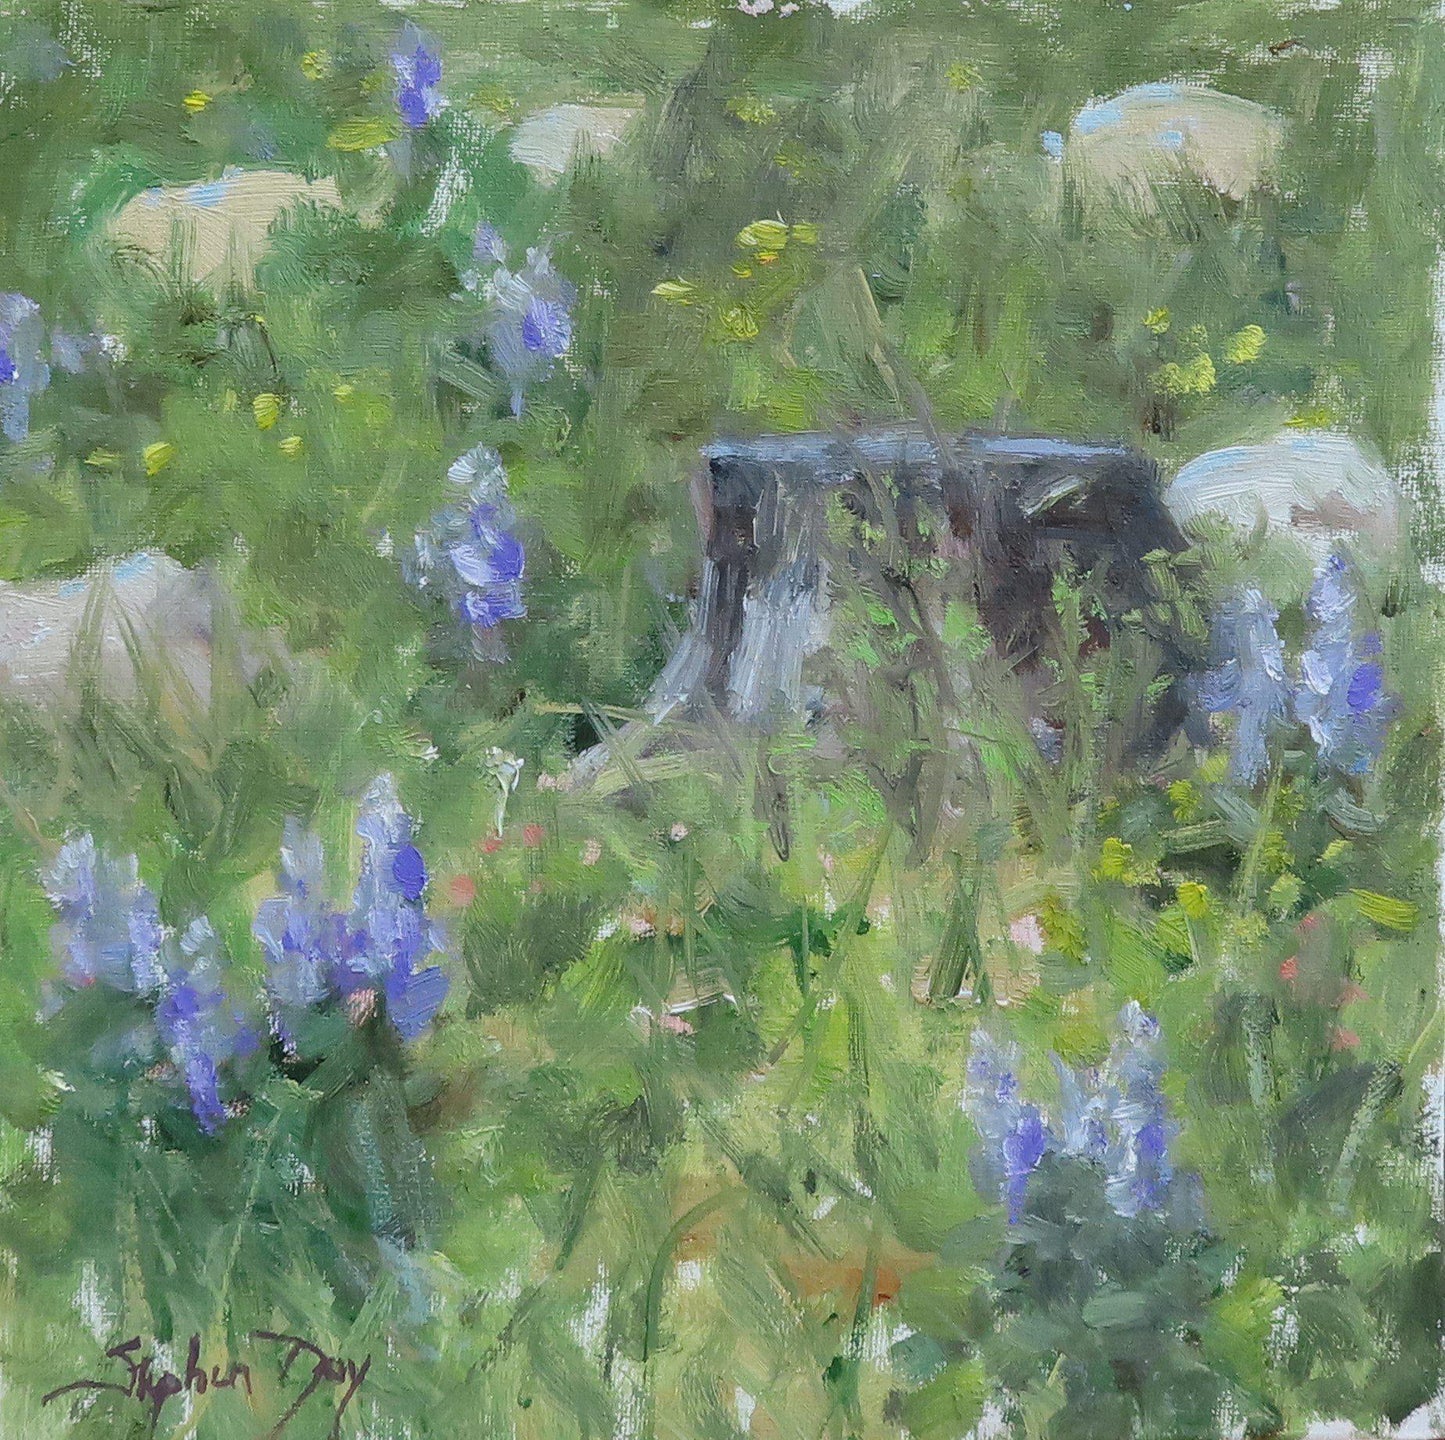 Mountain Meadow Spring-Painting-Stephen Day-Sorrel Sky Gallery